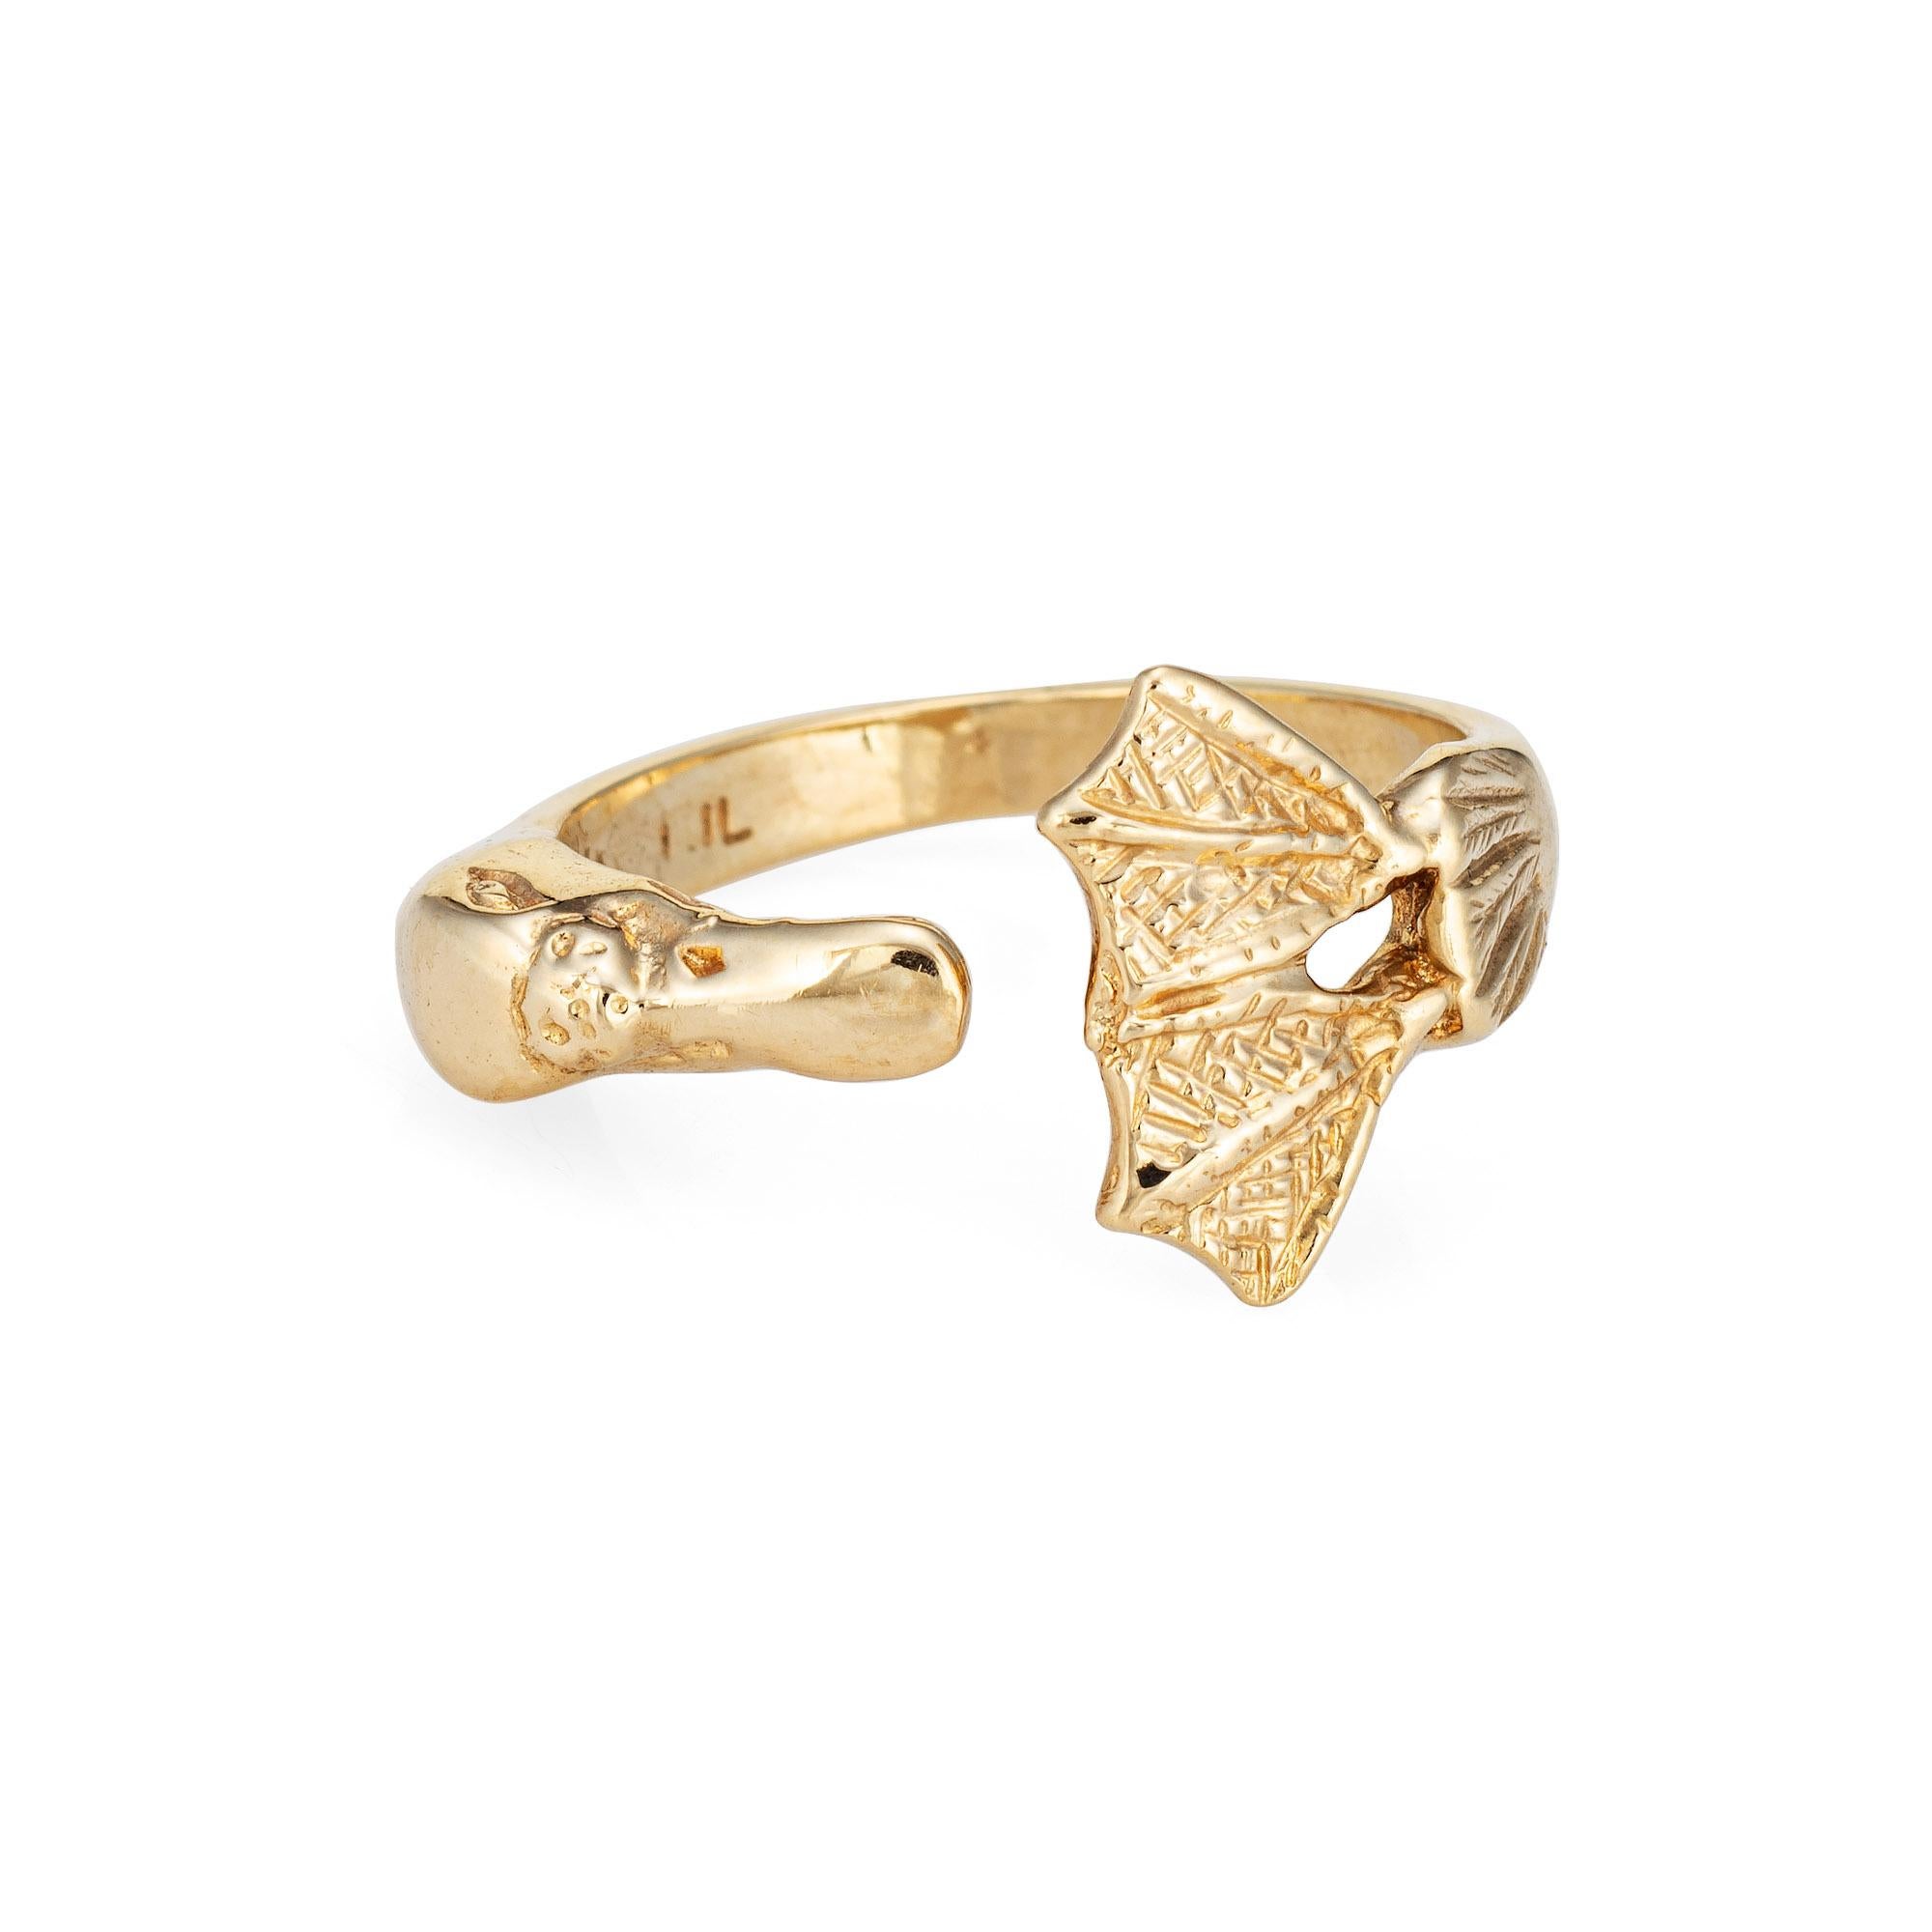 Distinct duck ring crafted in 14 karat yellow gold. 

The sweet as can be ring features a duck with webbed feet and bill to the center of the band. The band is great worn alone or layered with you fine jewelry from any era. The low rise band (2mm -